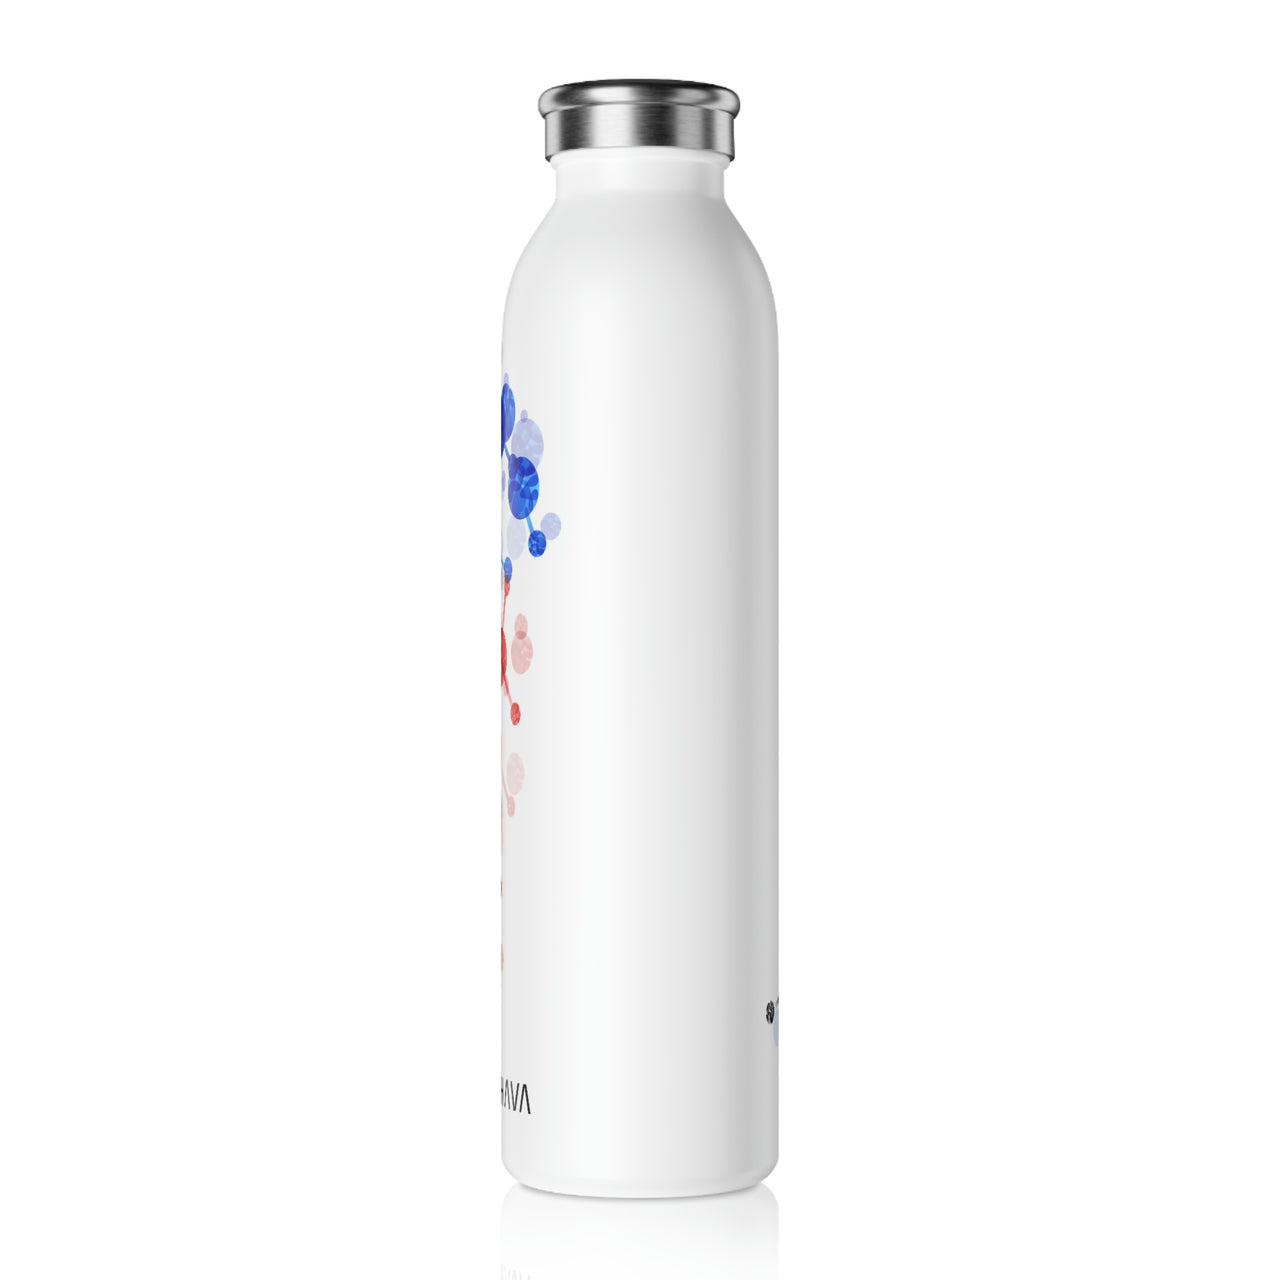 Polyamory Flag Slim Water Bottle D.C. Pride - My Rainbow is In My DNA SHAVA CO